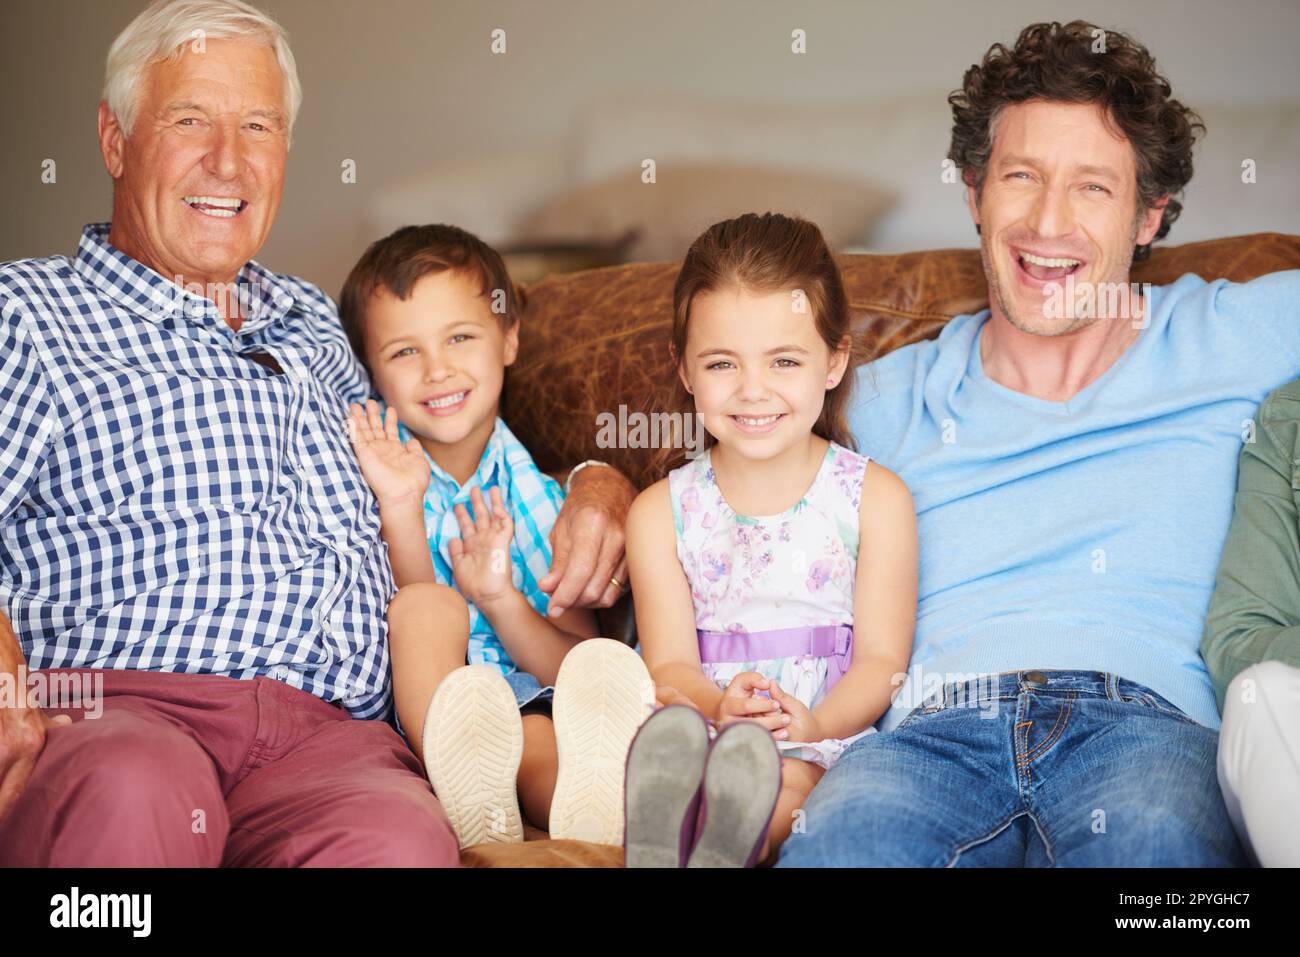 Cherished family moments. two children sitting with their father and grandfather indoors. Stock Photo